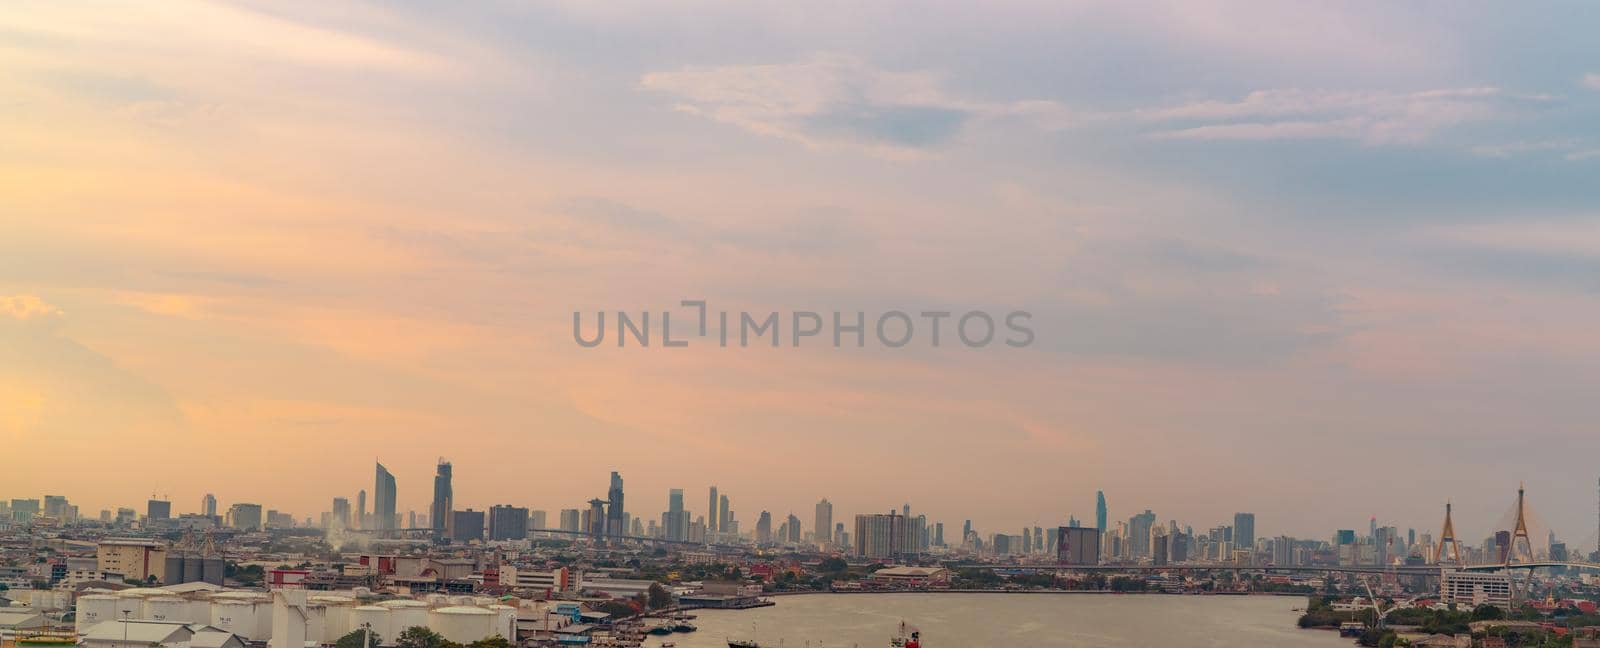 Cityscape of modern building. Cityscape in Asia. Business office building. City with sunset sky. Horizontal view of city with crowd of skyscraper building and the river. Capital city in Thailand. by Fahroni